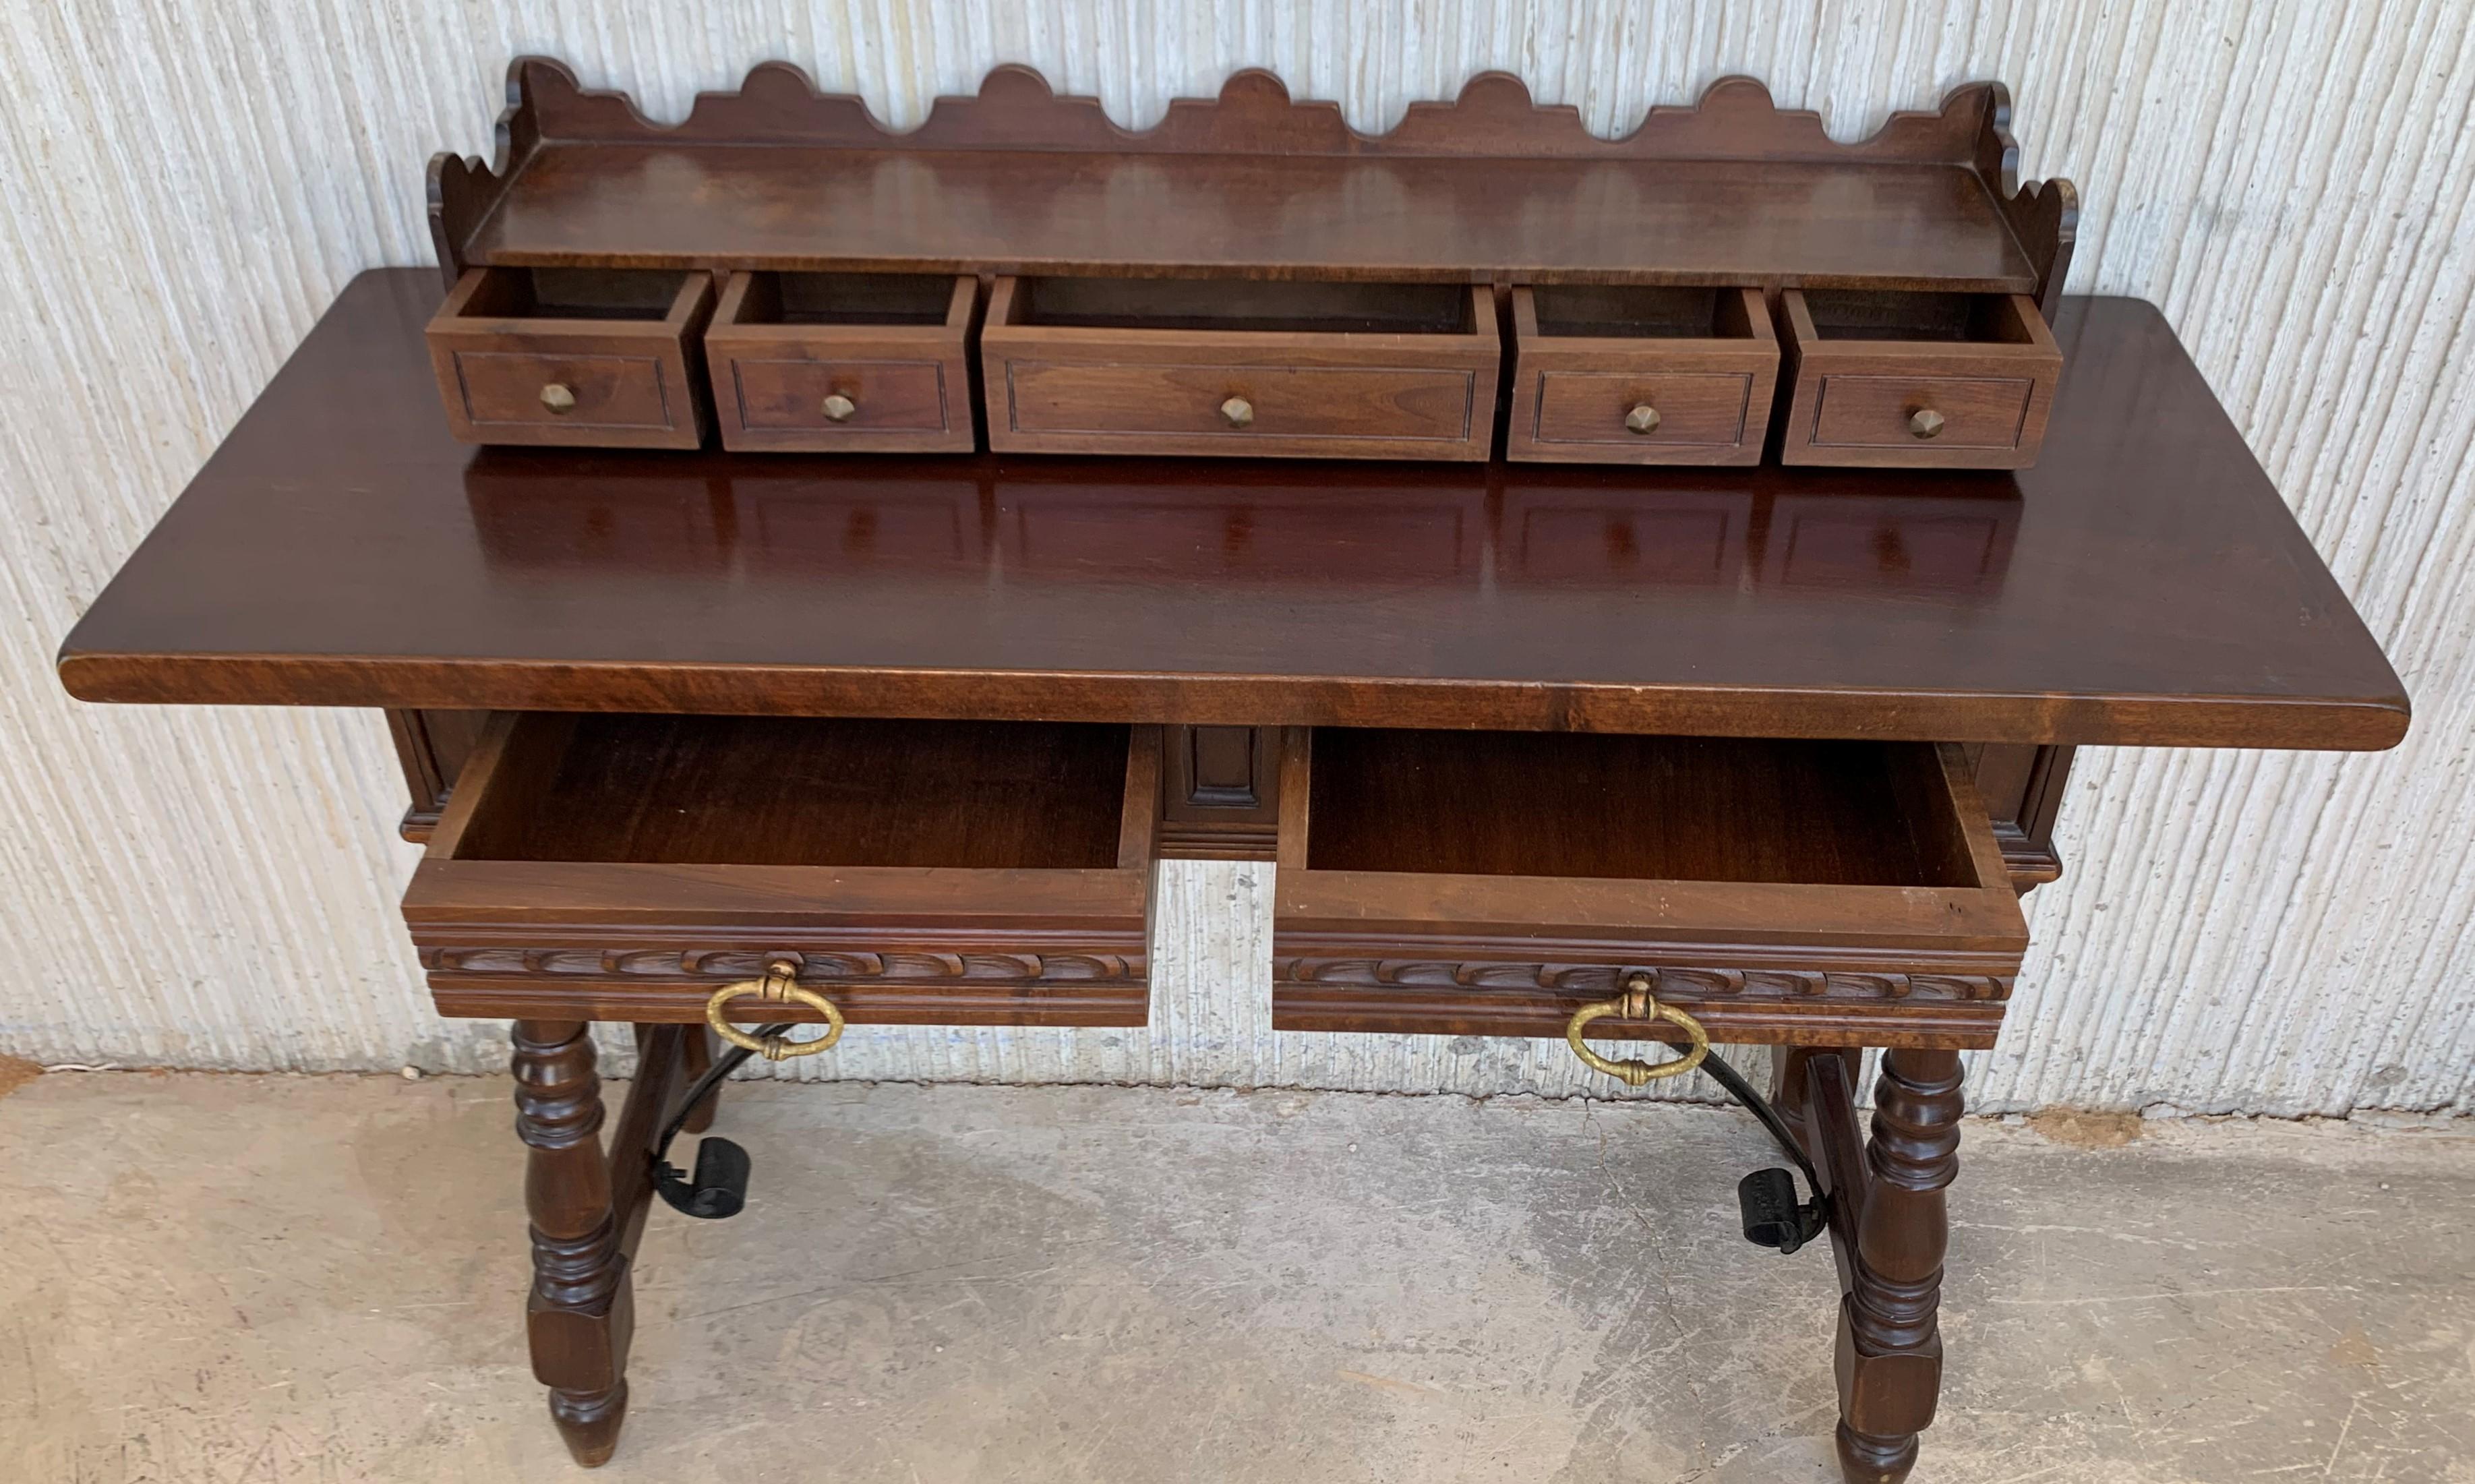 Catalan Spanish Lady Desk or Console Table in Carved Walnut and Iron Stretcher In Good Condition For Sale In Miami, FL